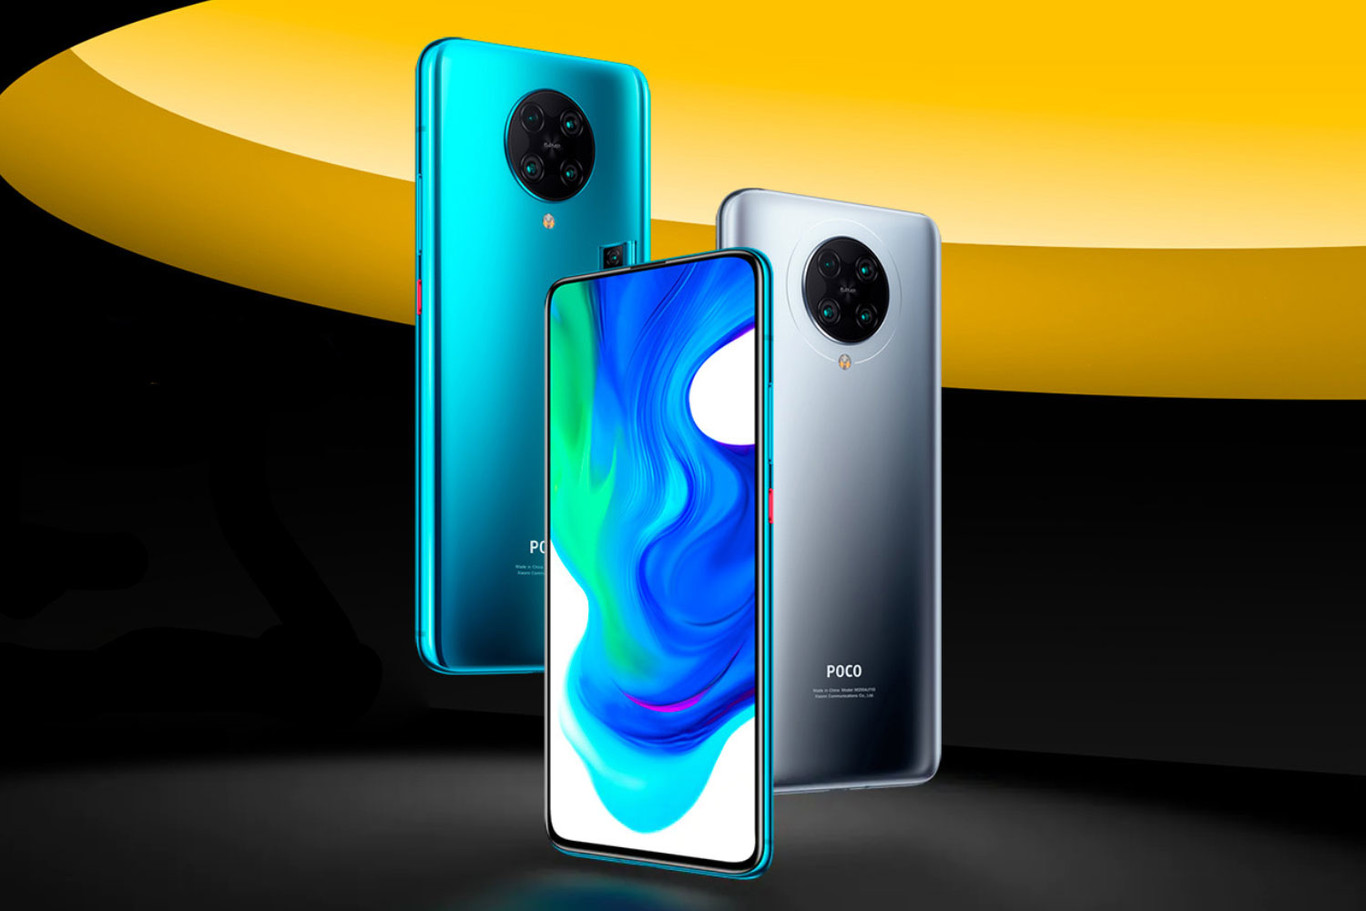 Poco F2 Pro now available in the UK